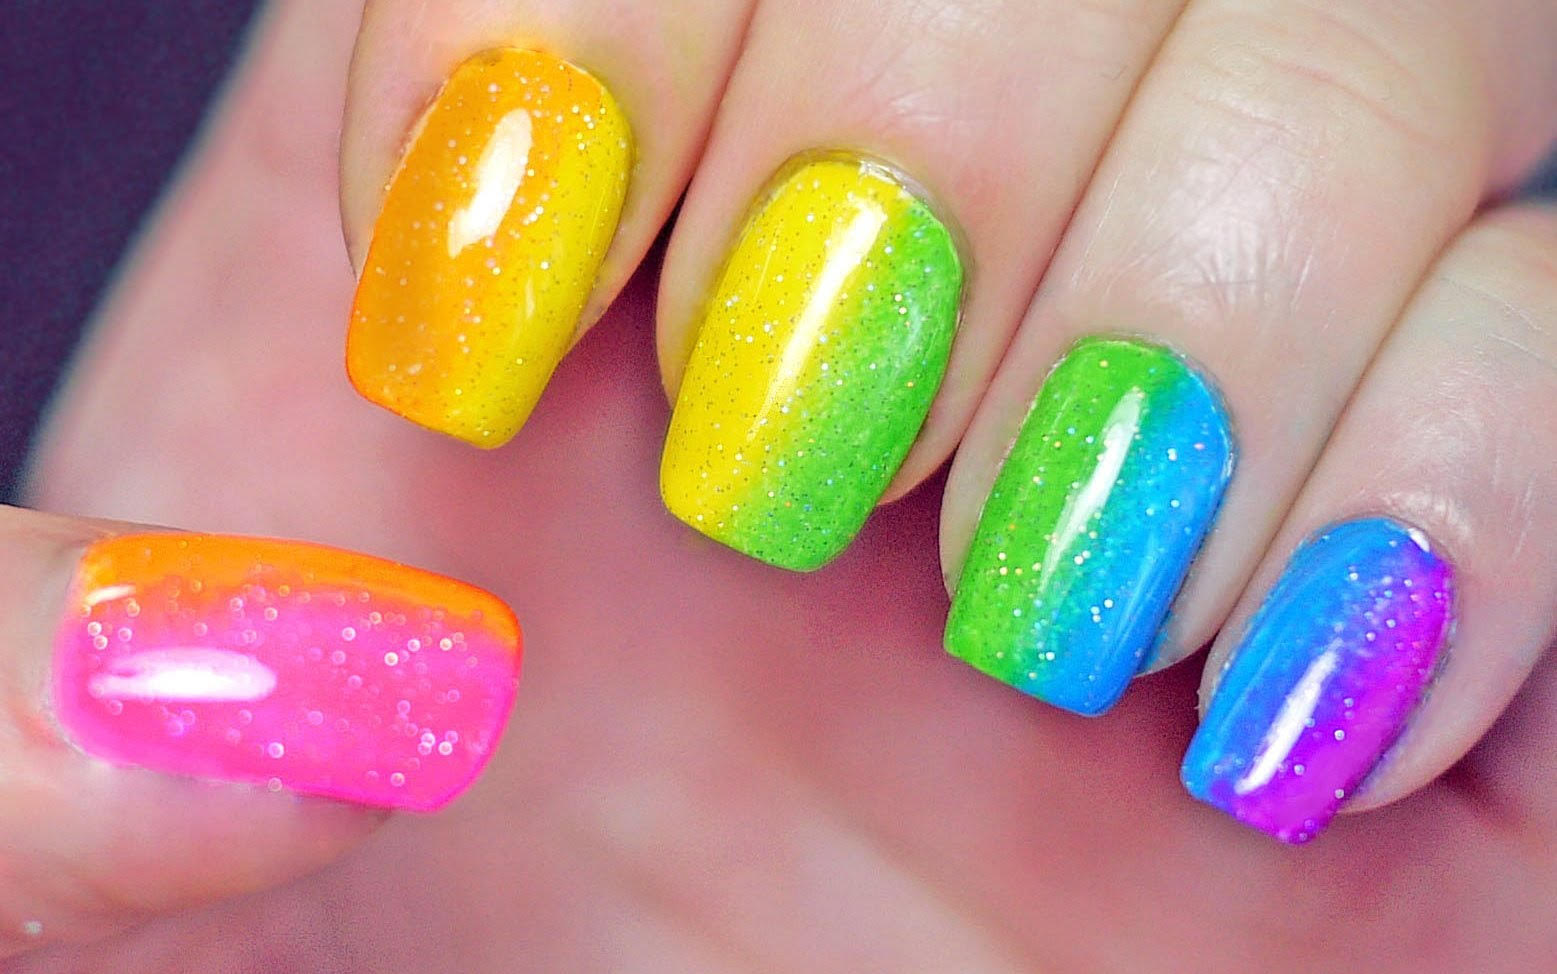 6. Colorful Rainbow Nail Art with Polish - wide 4